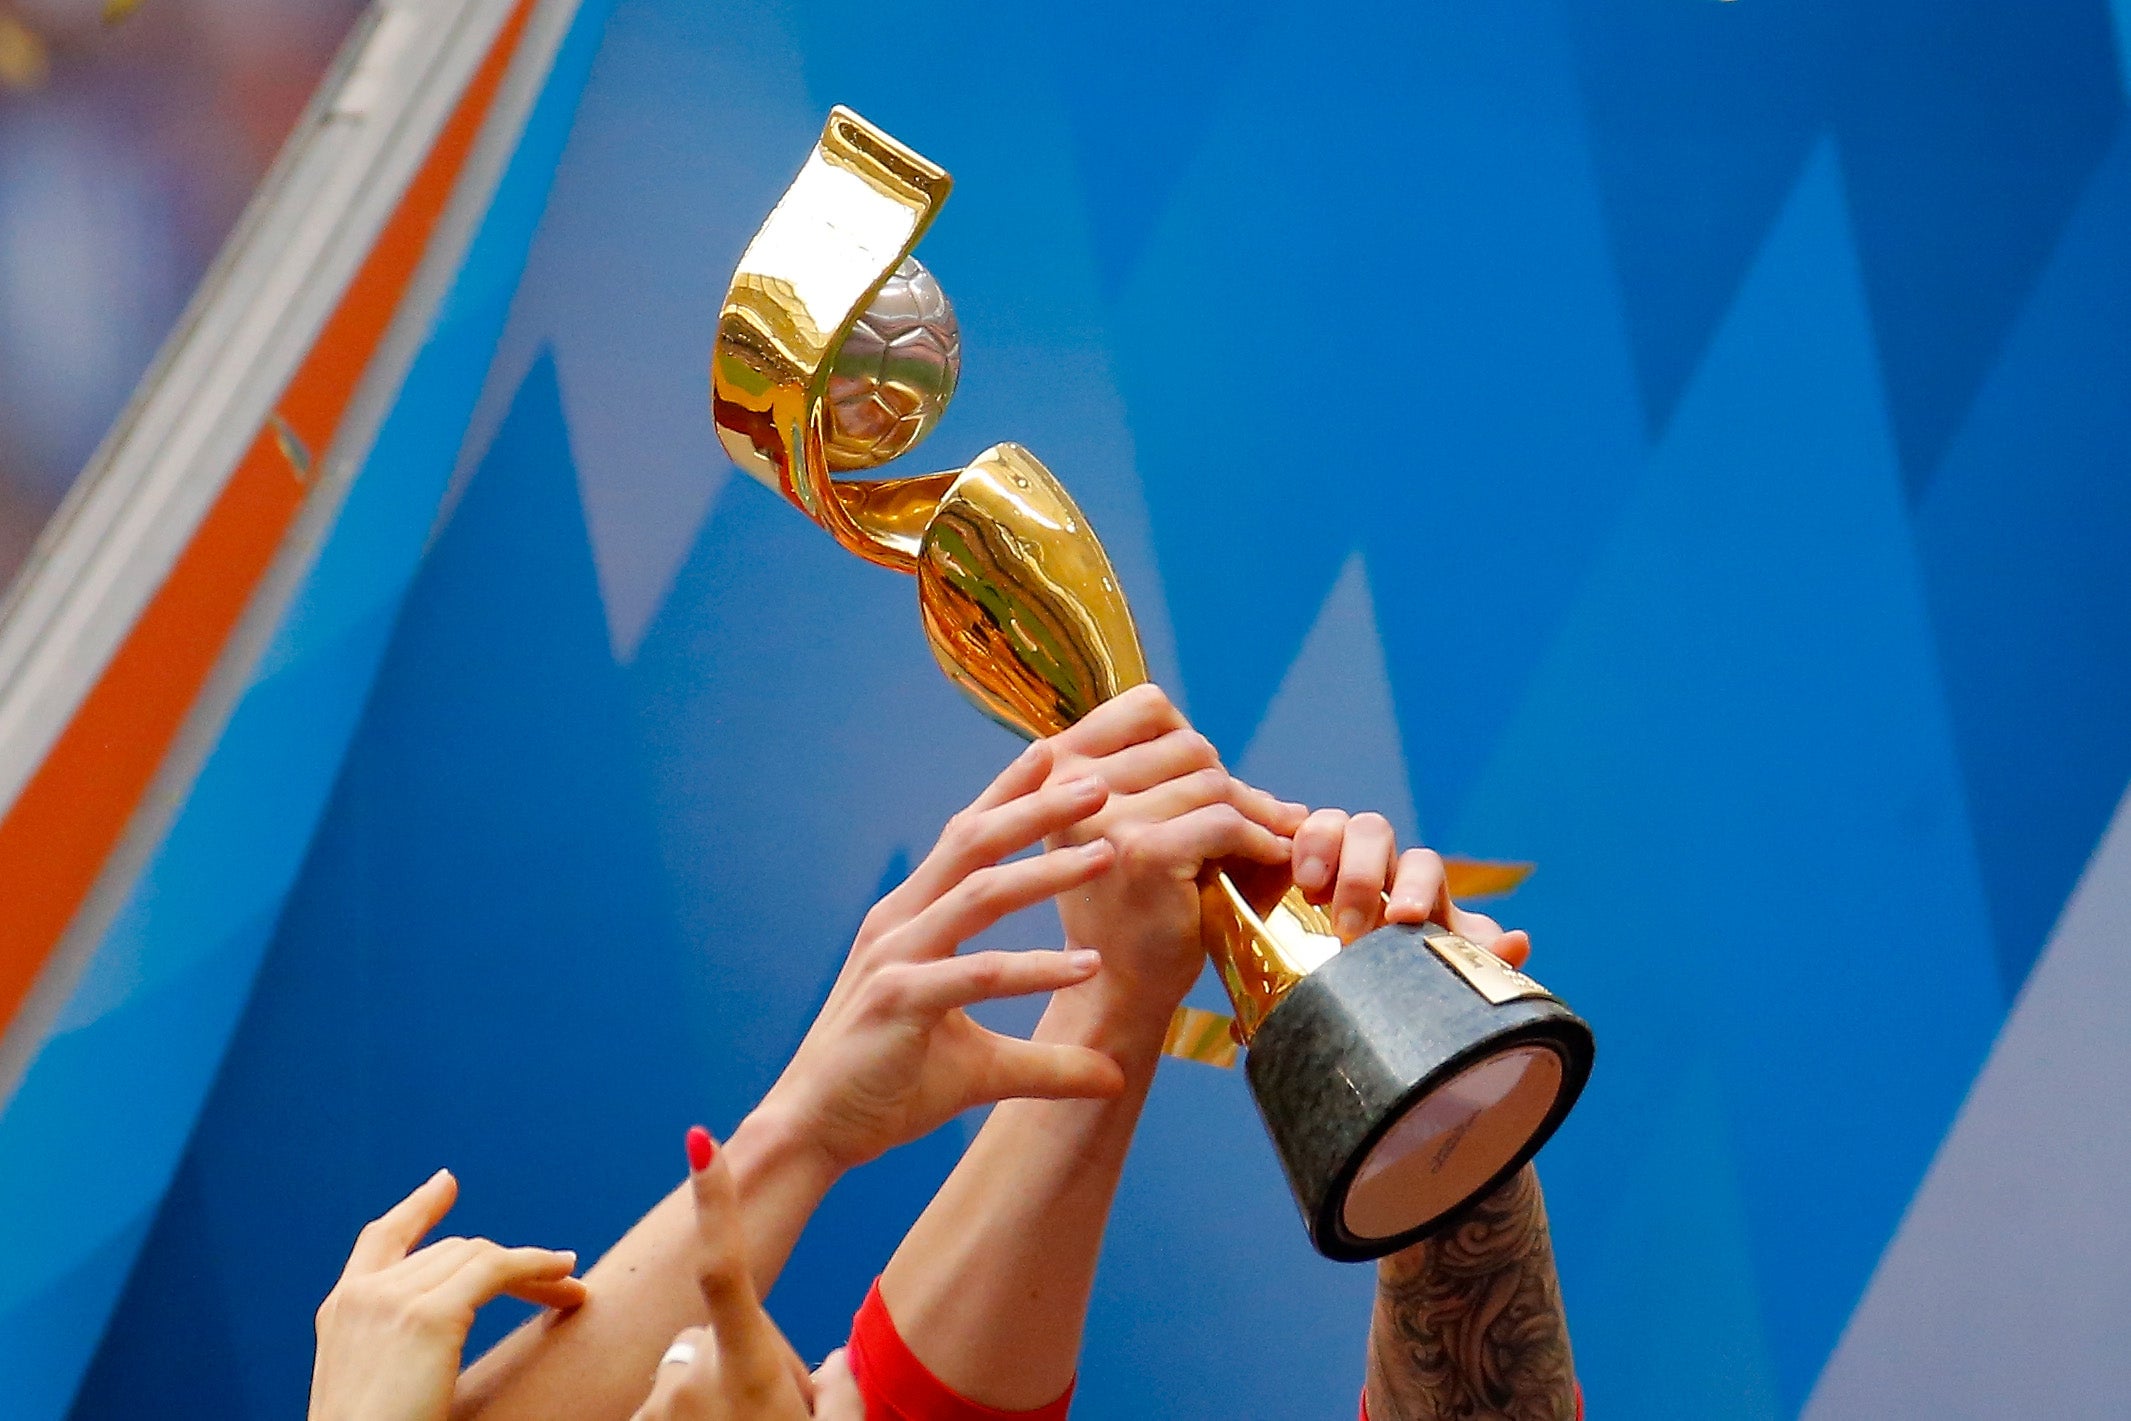 World s cup. Women World Cup 2023 трофей. FIFA women's World Cup 2023. Women s World Cup. World Cup 2019 woman.